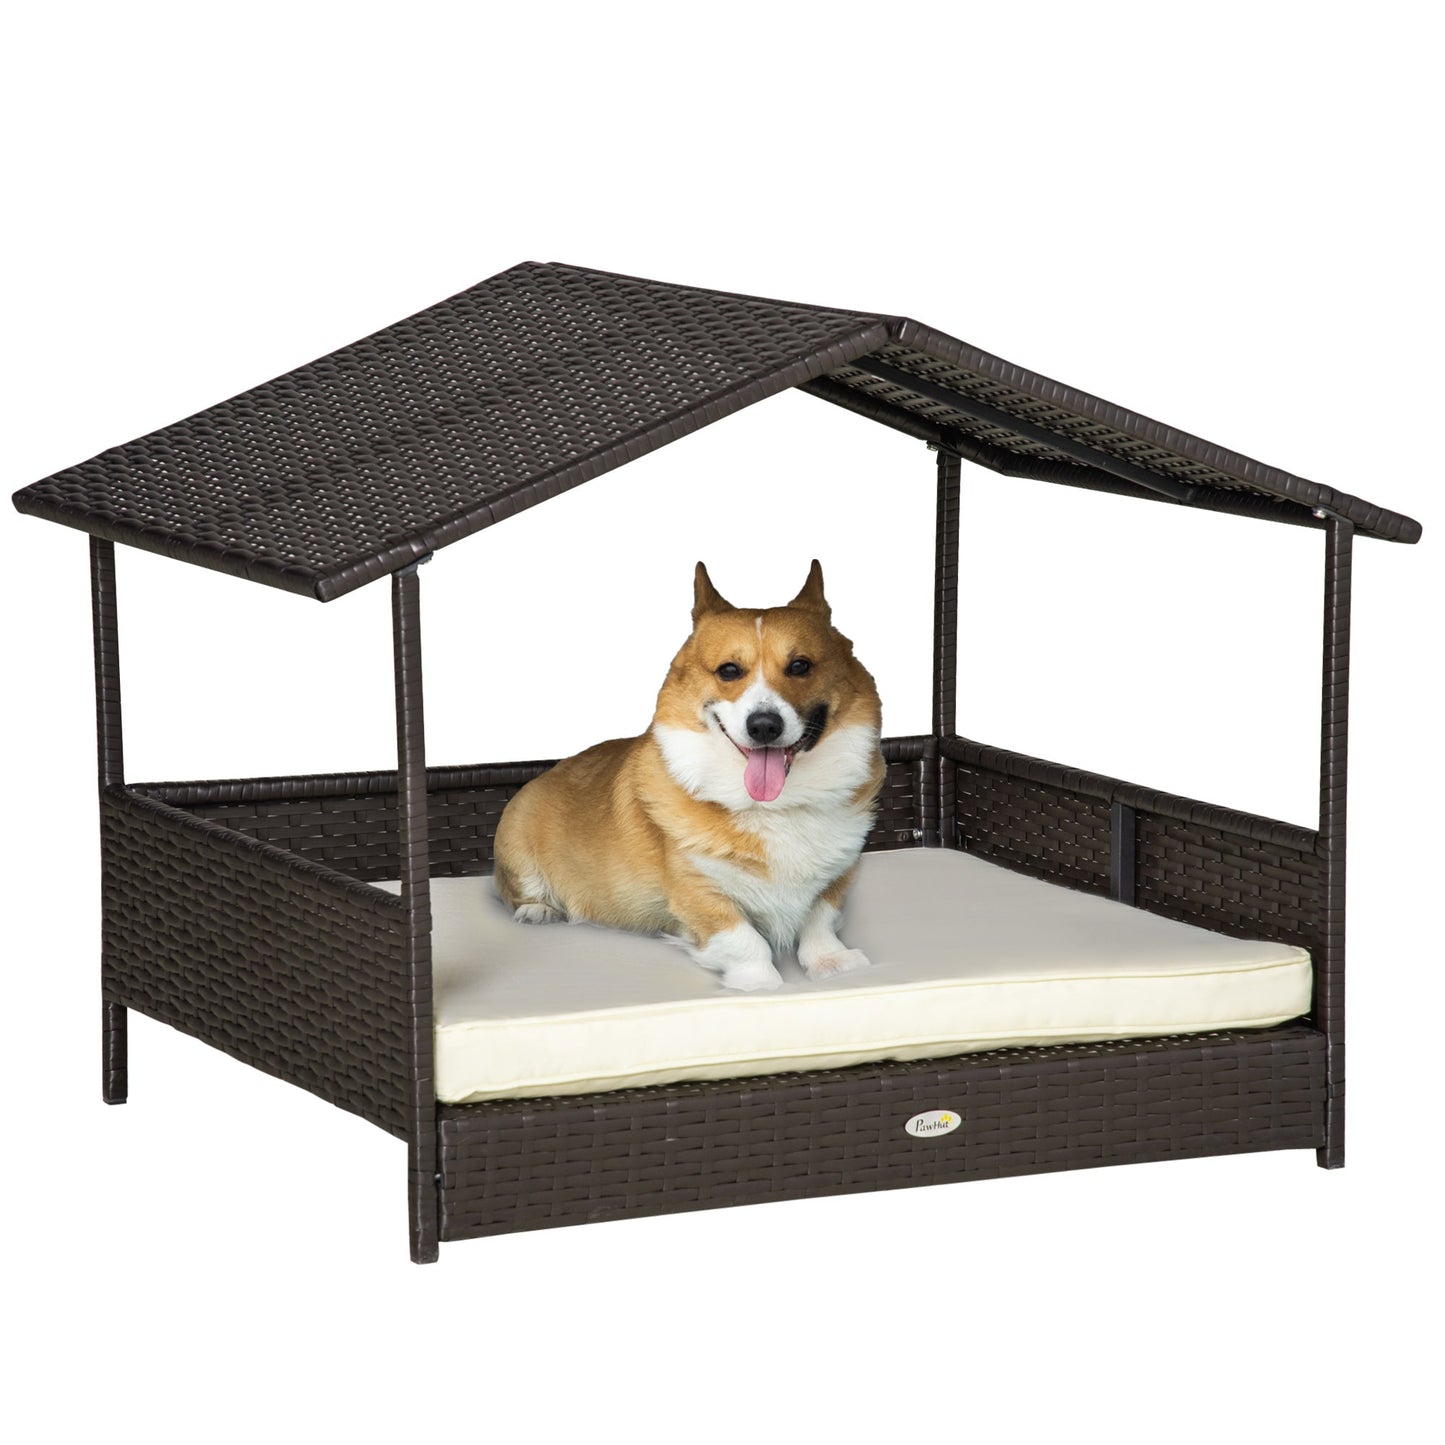 Pet Supplies-Wicker Dog House Elevated Raised Rattan Bed for Indoor/Outdoor with Removable Cushion Lounge, Cream - Outdoor Style Company